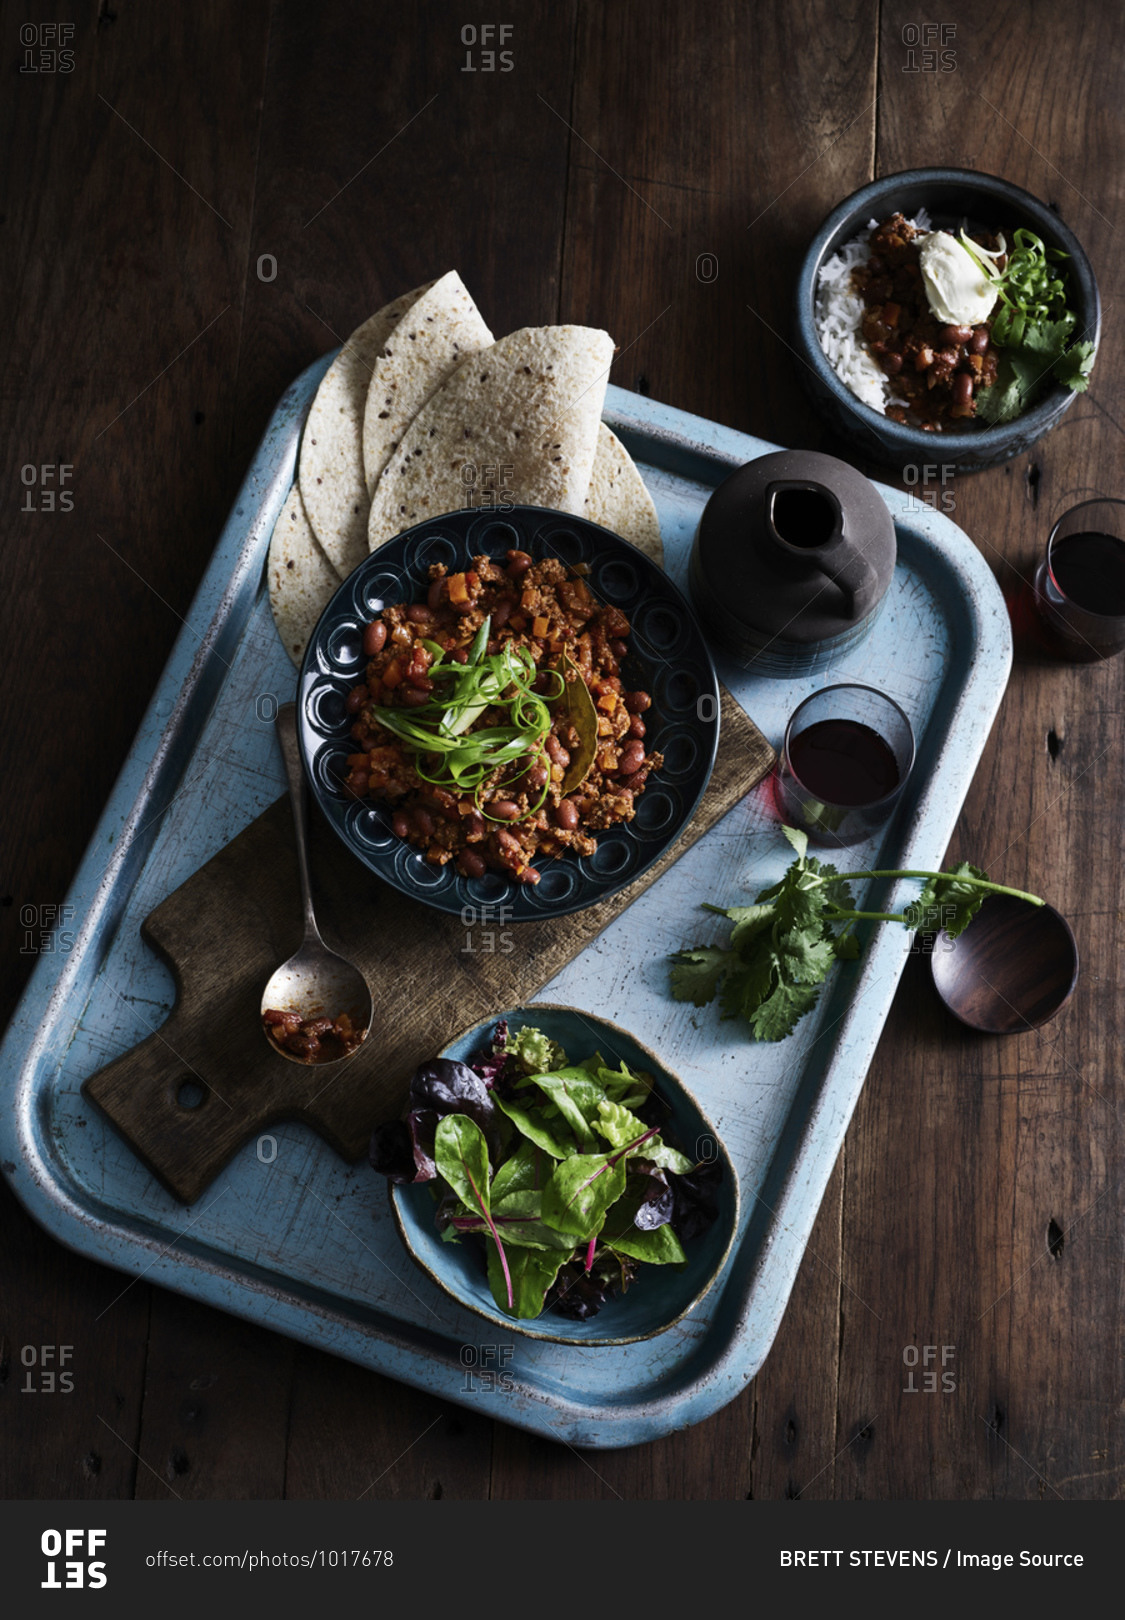 Rustic low key still life with tray of chilli con carne, salad and coffee, overhead view